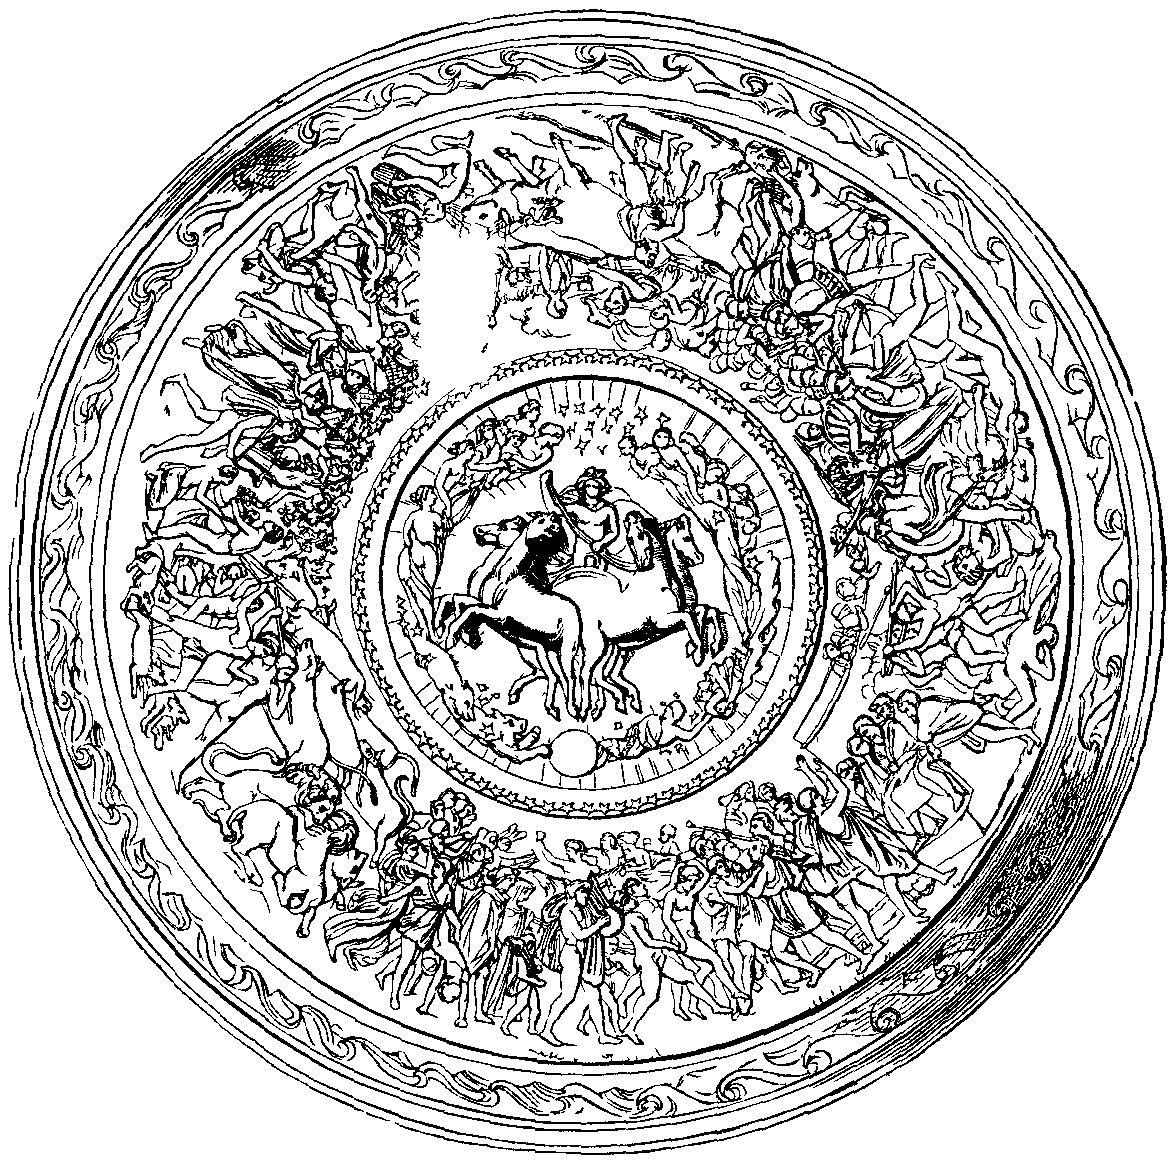 Illustration: THE SHIELD OF ACHILLES.